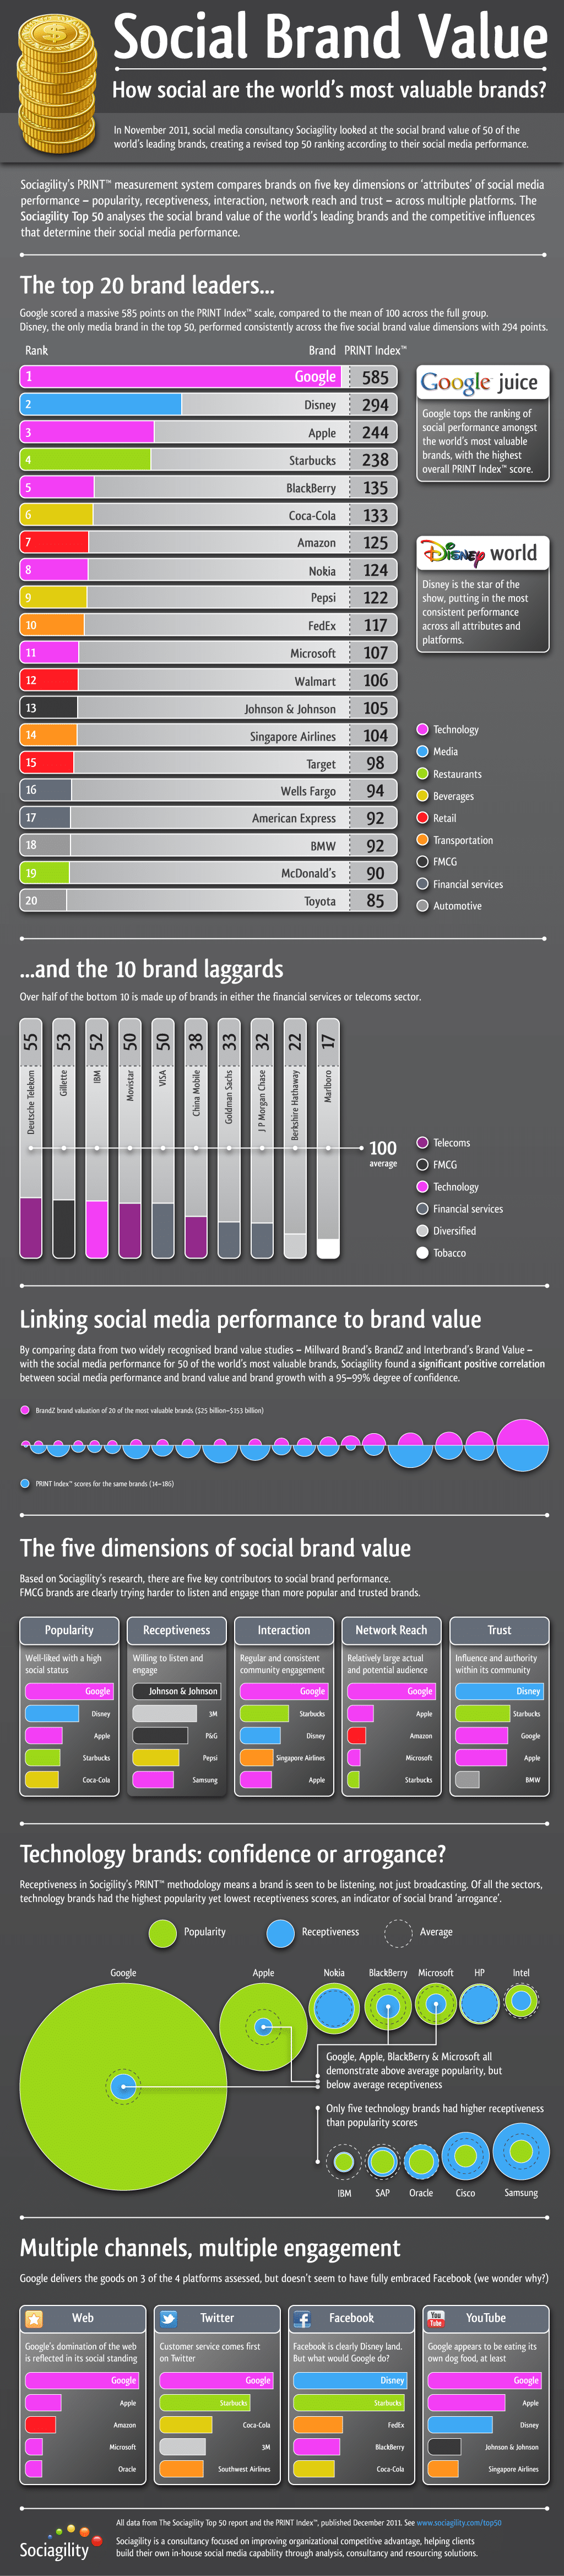 Social Brand Value: Leading Brands Compared [Infographic]